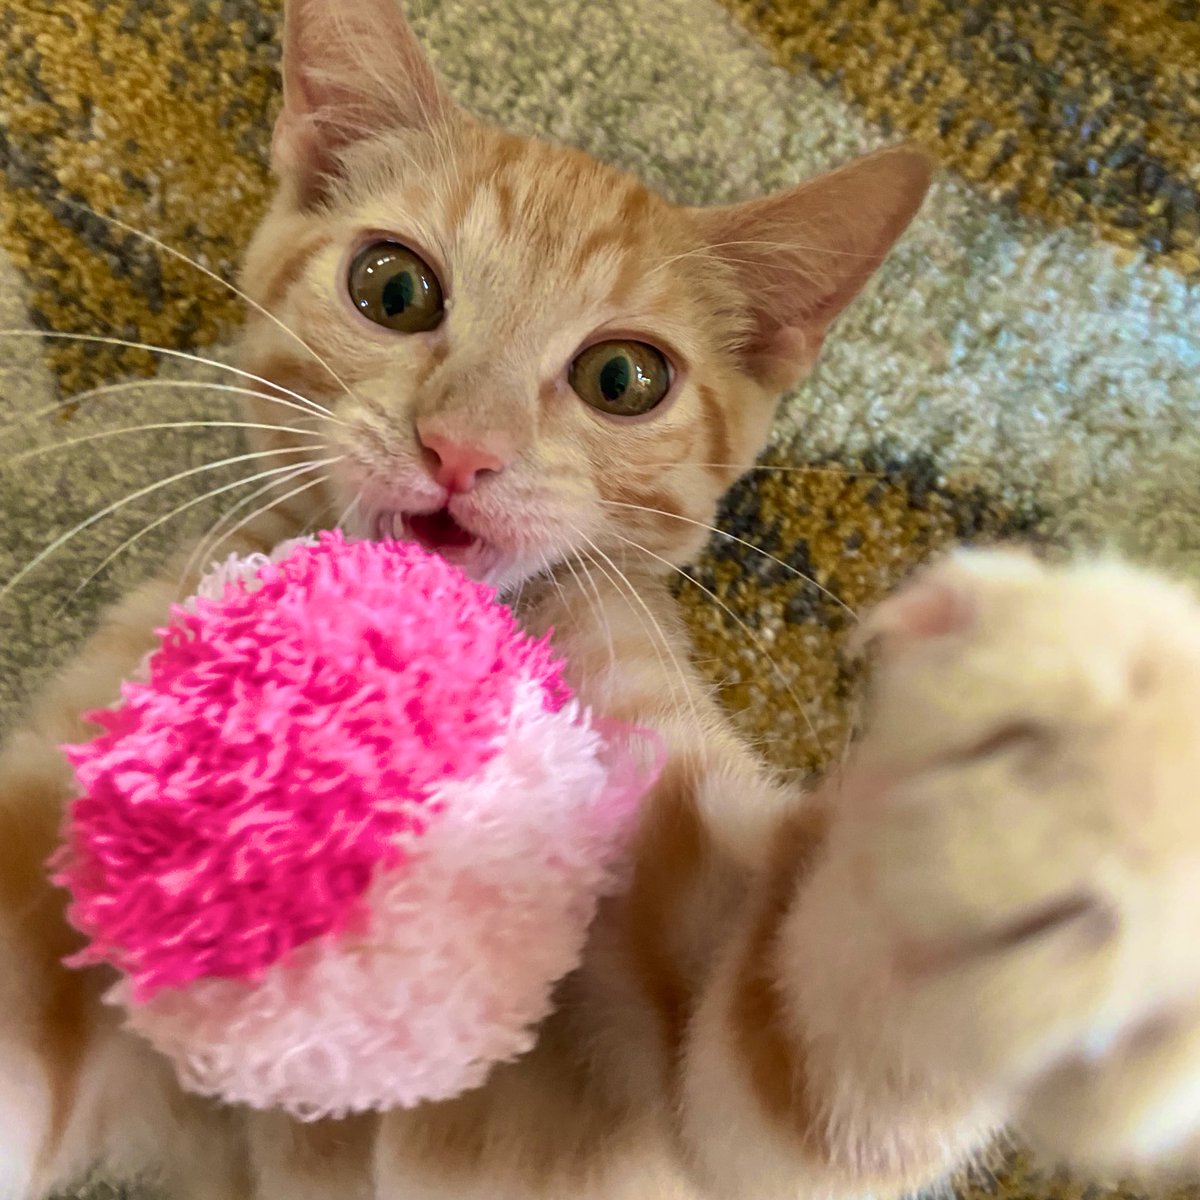 Ball or mom? Ball or mom? Which do I grab? #SoManyChoices #Otto #kittens #CatsOfTwitter #TGIF